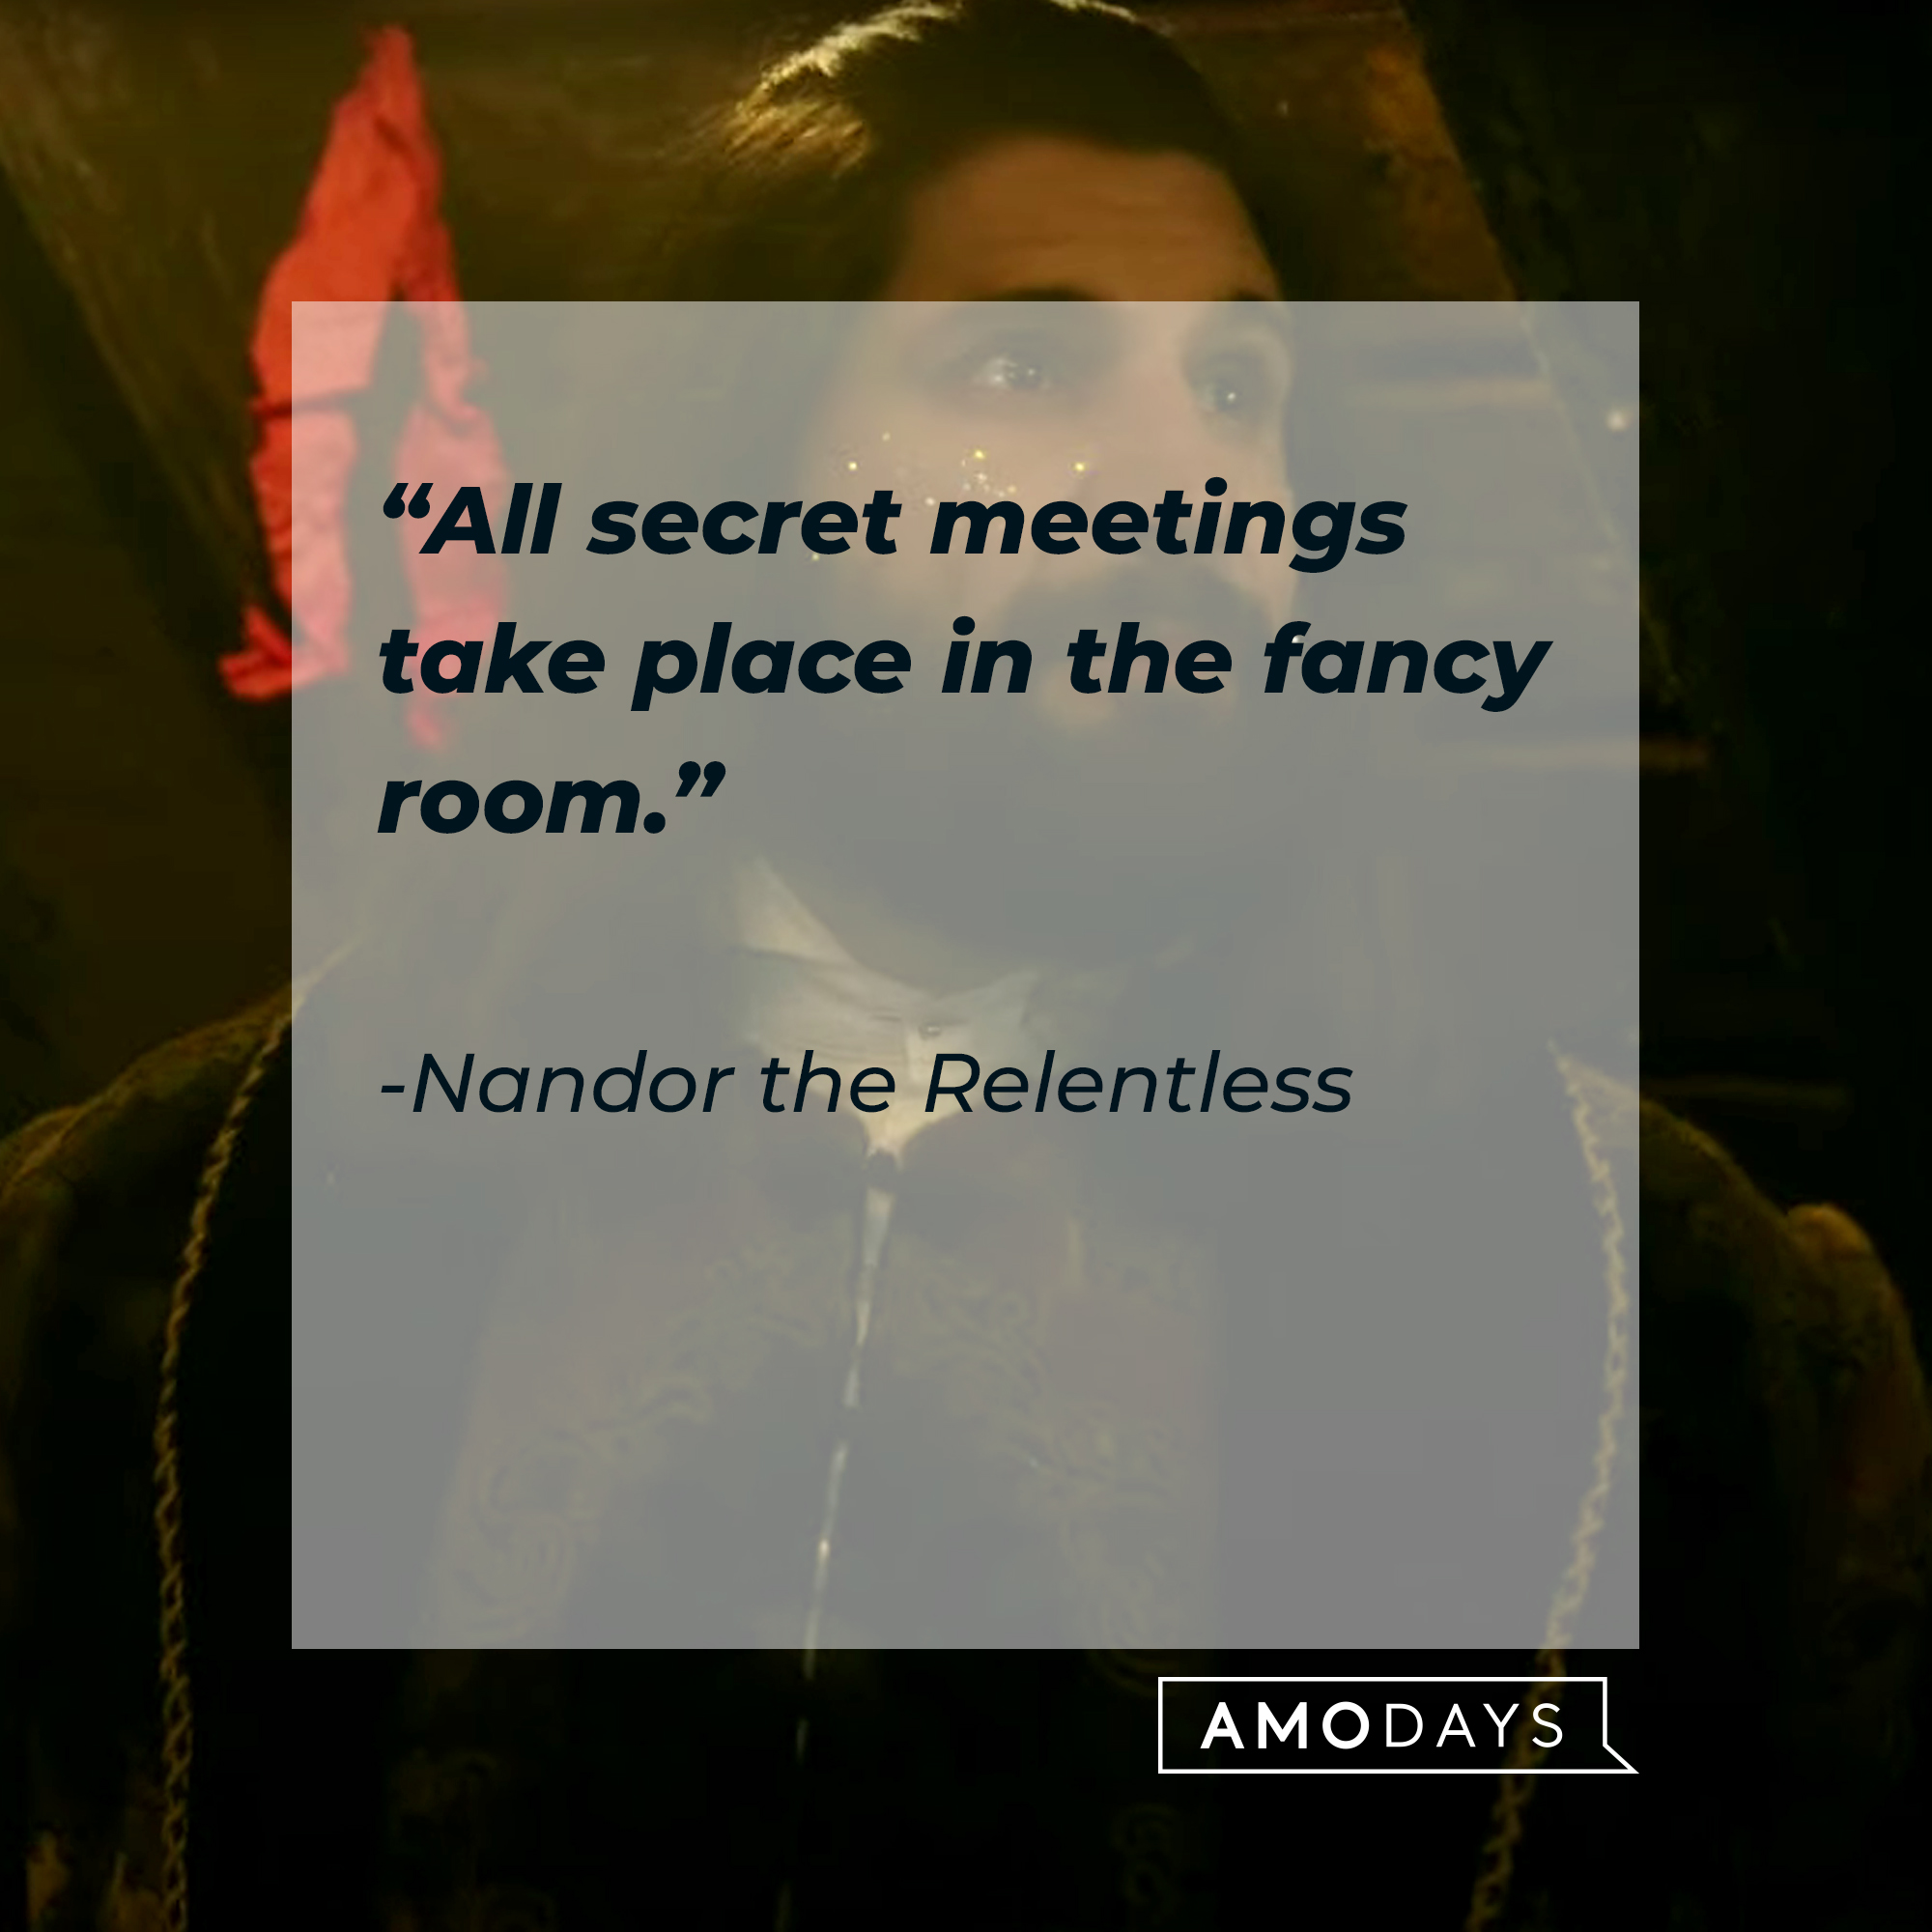 Nandor the Relentless, with his quote: "All secret meetings take place in the fancy room." | Source: Facebook.com/TheShadowsFX